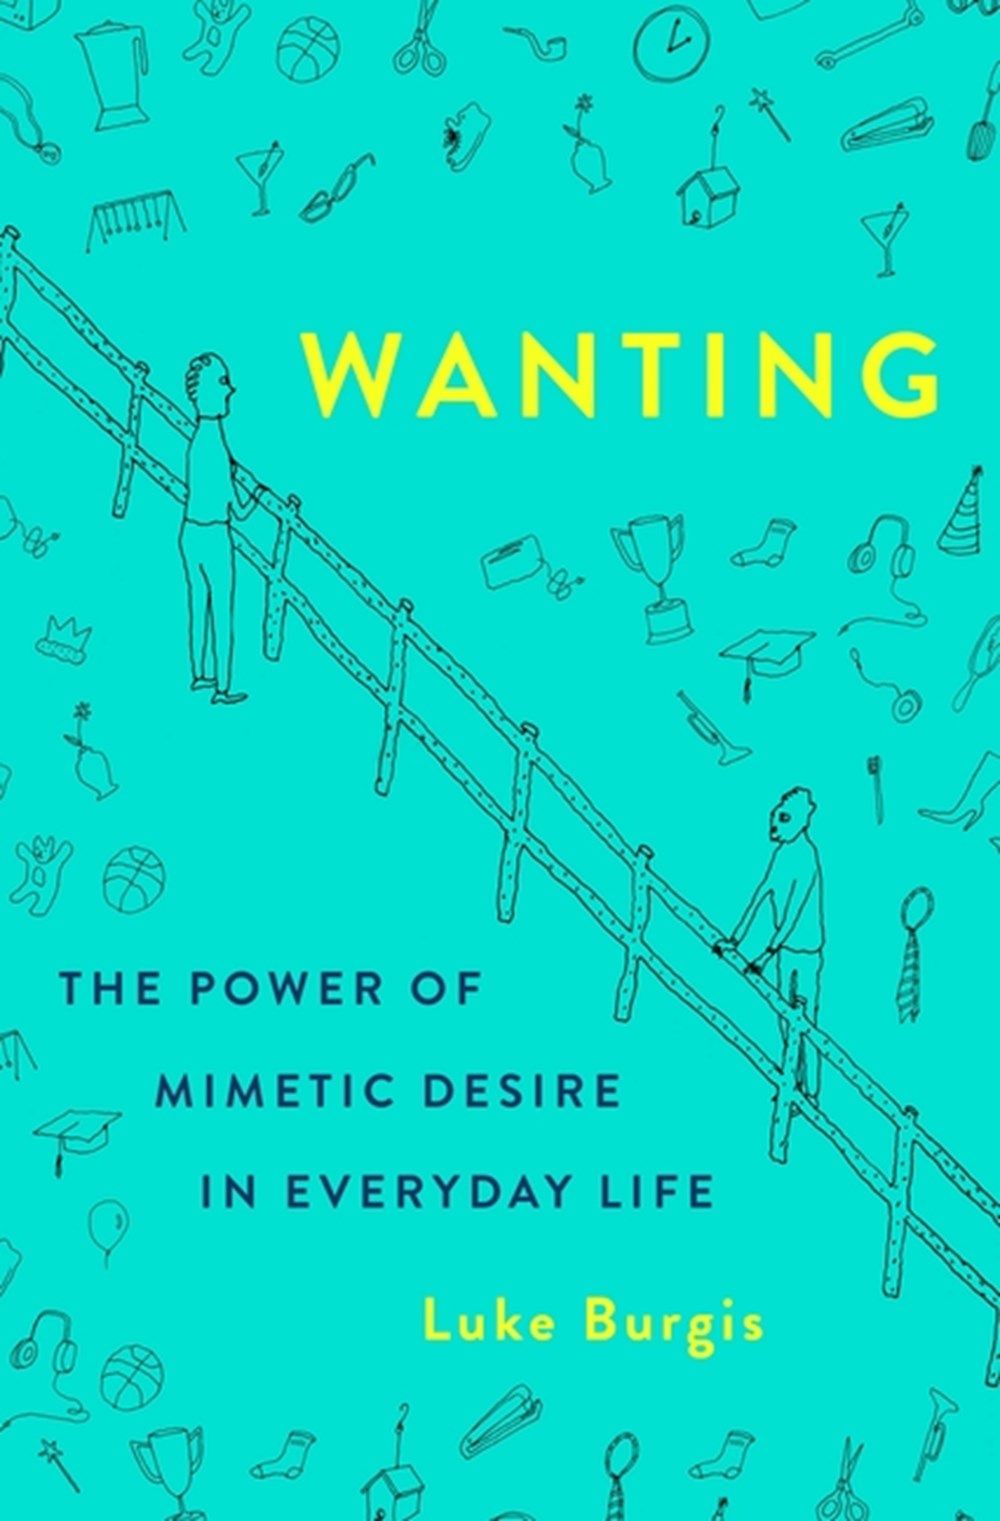 Wanting The Power of Mimetic Desire in Everyday Life